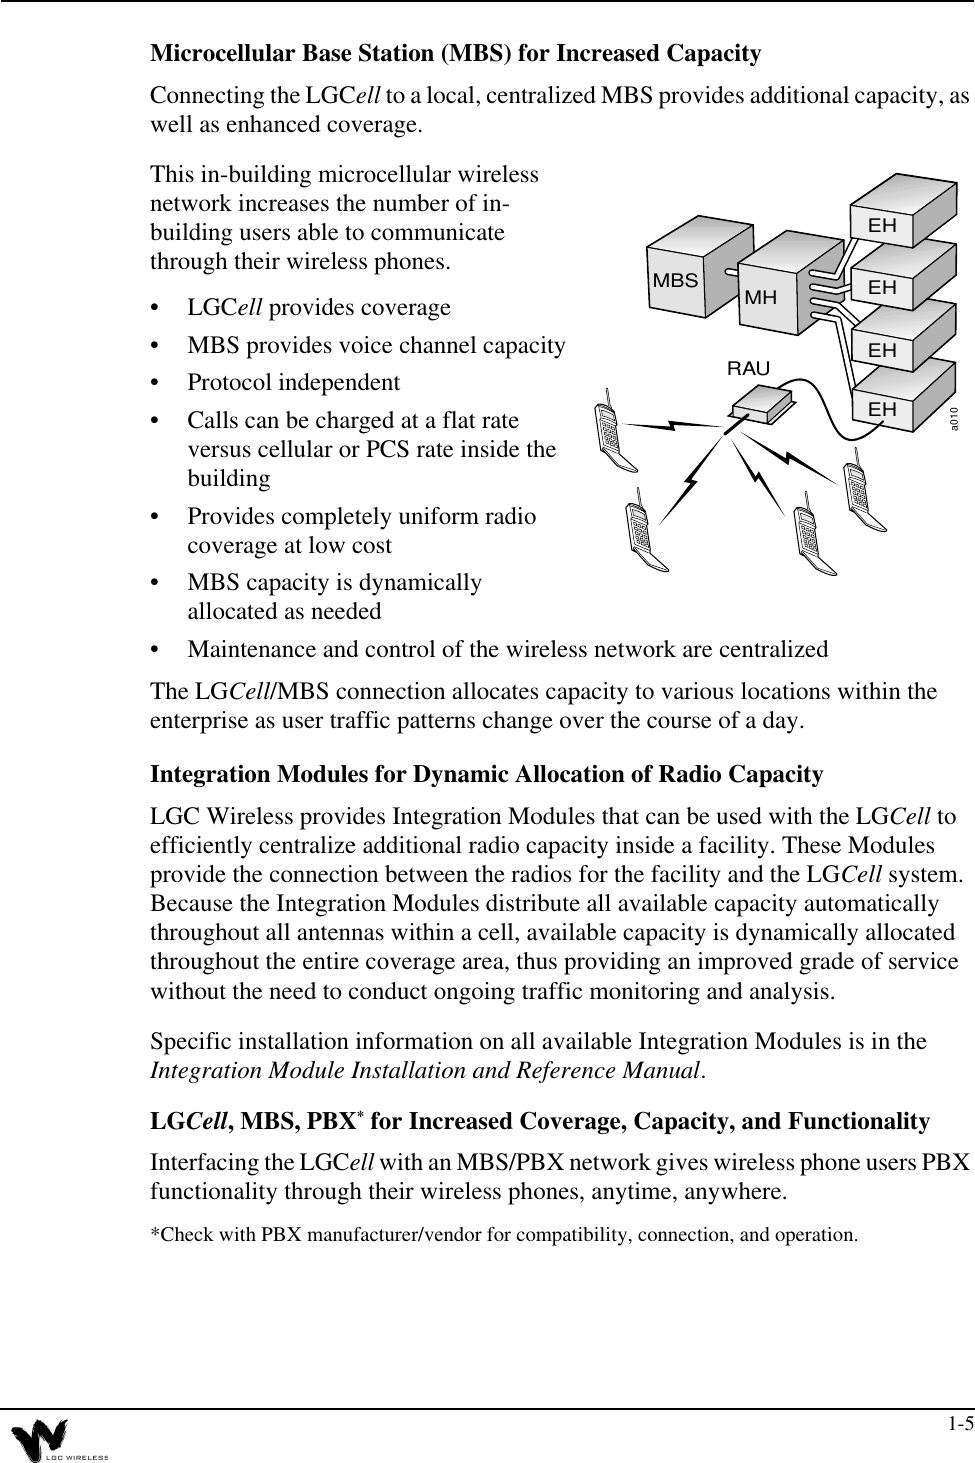 1-5Microcellular Base Station (MBS) for Increased CapacityConnecting the LGCell to a local, centralized MBS provides additional capacity, as well as enhanced coverage.This in-building microcellular wireless network increases the number of in-building users able to communicate through their wireless phones.•LGCell provides coverage•MBS provides voice channel capacity•Protocol independent•Calls can be charged at a flat rate versus cellular or PCS rate inside the building•Provides completely uniform radio coverage at low cost•MBS capacity is dynamically allocated as needed•Maintenance and control of the wireless network are centralizedThe LGCell/MBS connection allocates capacity to various locations within the enterprise as user traffic patterns change over the course of a day.Integration Modules for Dynamic Allocation of Radio CapacityLGC Wireless provides Integration Modules that can be used with the LGCell to efficiently centralize additional radio capacity inside a facility. These Modules provide the connection between the radios for the facility and the LGCell system. Because the Integration Modules distribute all available capacity automatically throughout all antennas within a cell, available capacity is dynamically allocated throughout the entire coverage area, thus providing an improved grade of service without the need to conduct ongoing traffic monitoring and analysis.Specific installation information on all available Integration Modules is in the Integration Module Installation and Reference Manual. LGCell, MBS, PBX* for Increased Coverage, Capacity, and FunctionalityInterfacing the LGCell with an MBS/PBX network gives wireless phone users PBX functionality through their wireless phones, anytime, anywhere.*Check with PBX manufacturer/vendor for compatibility, connection, and operation.a010MBS MHEHEHEHEHRAU